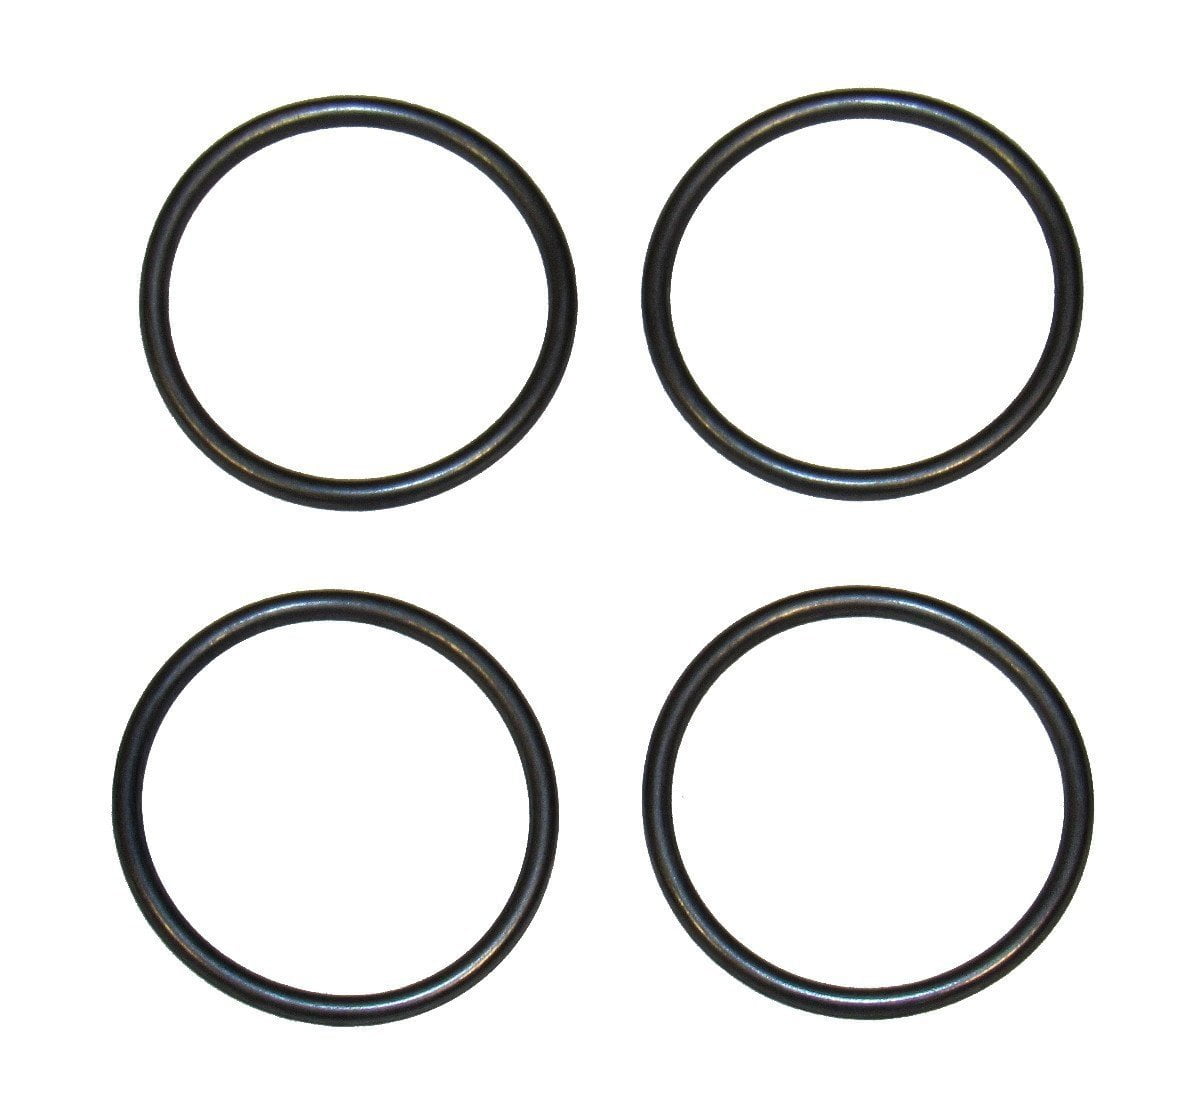 Replacement O-ring for Anti-Blowback Back Fittings Durable High Quality 5-Pack 